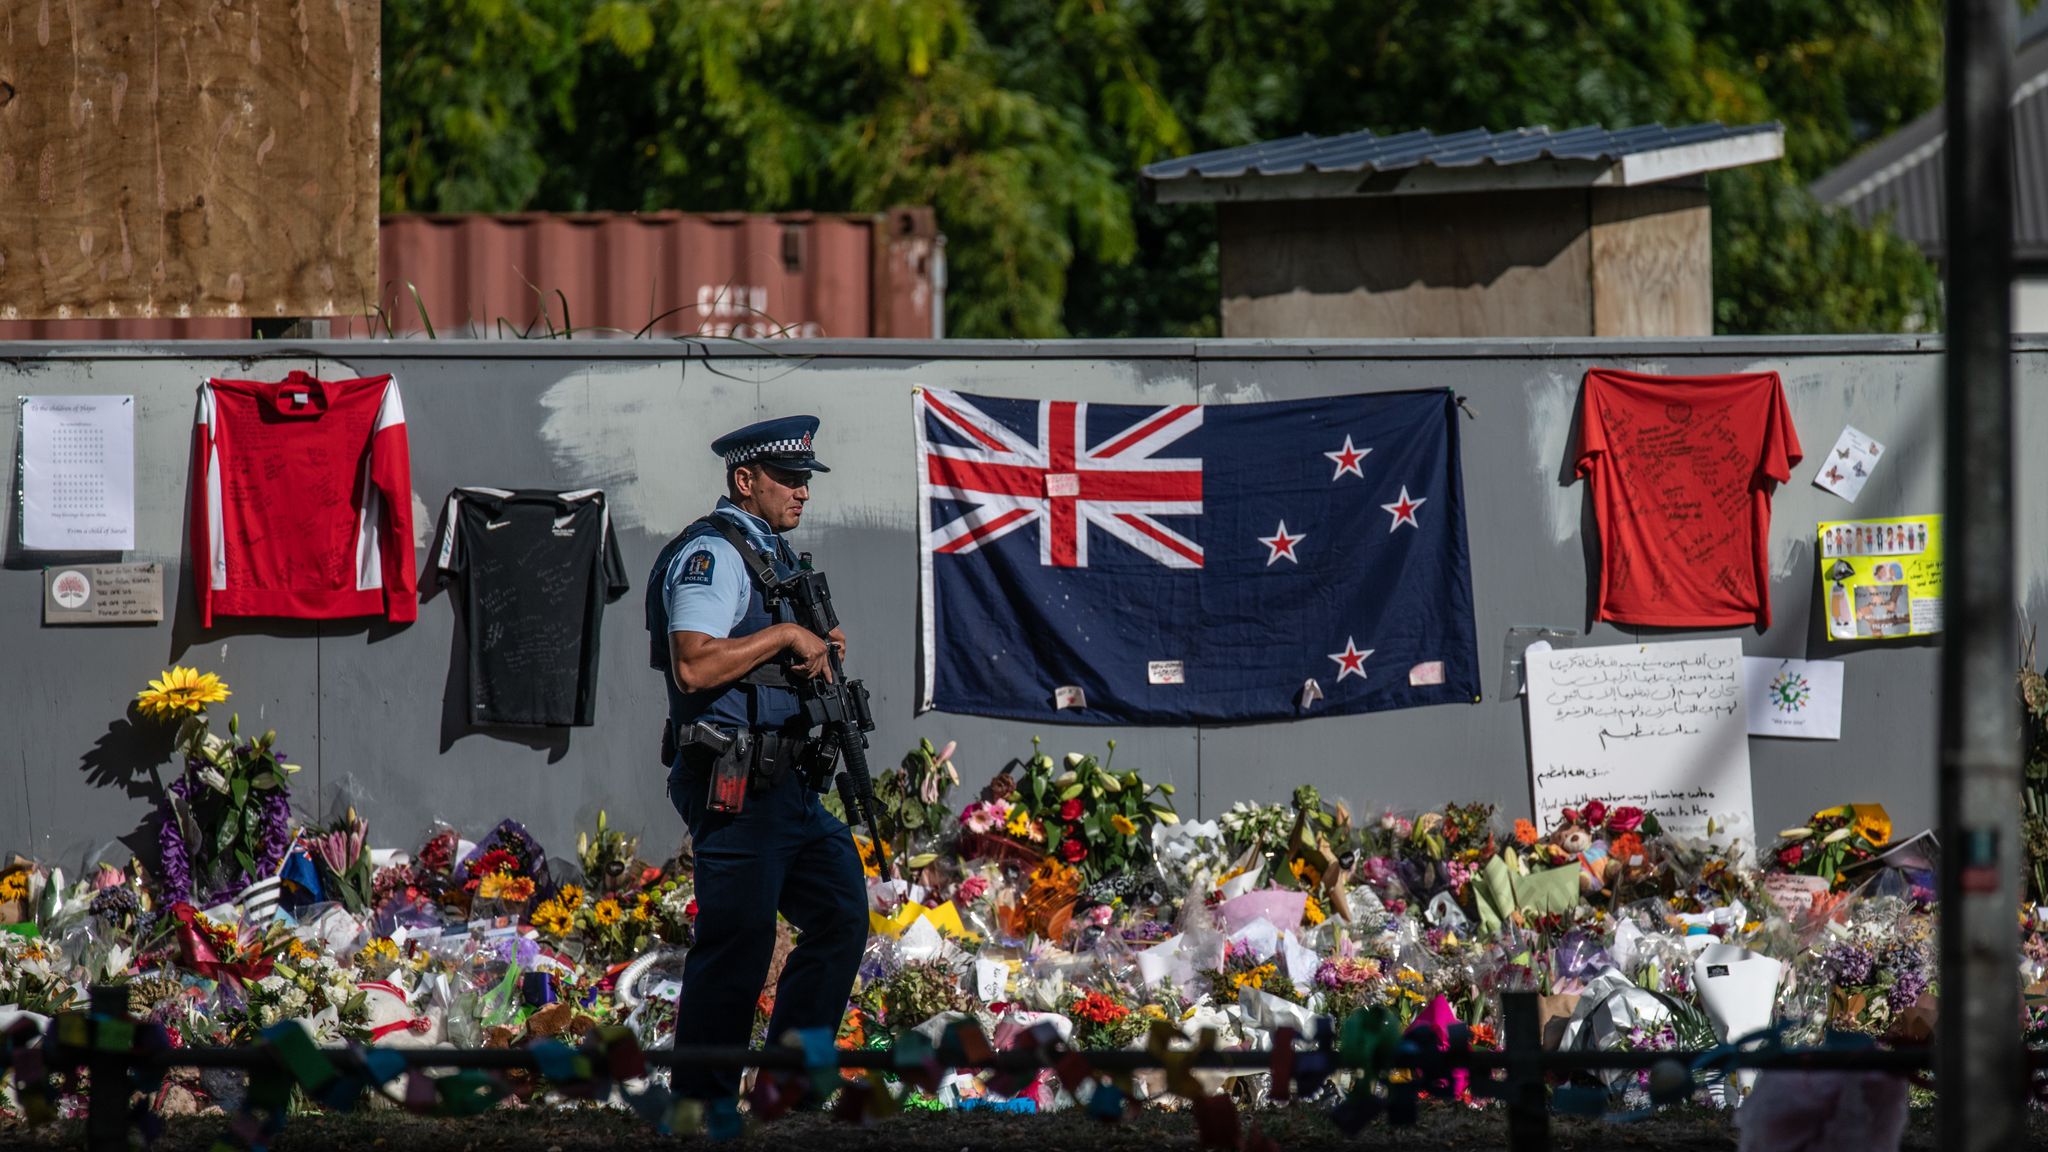 full 17 minute video of christchurch shooting